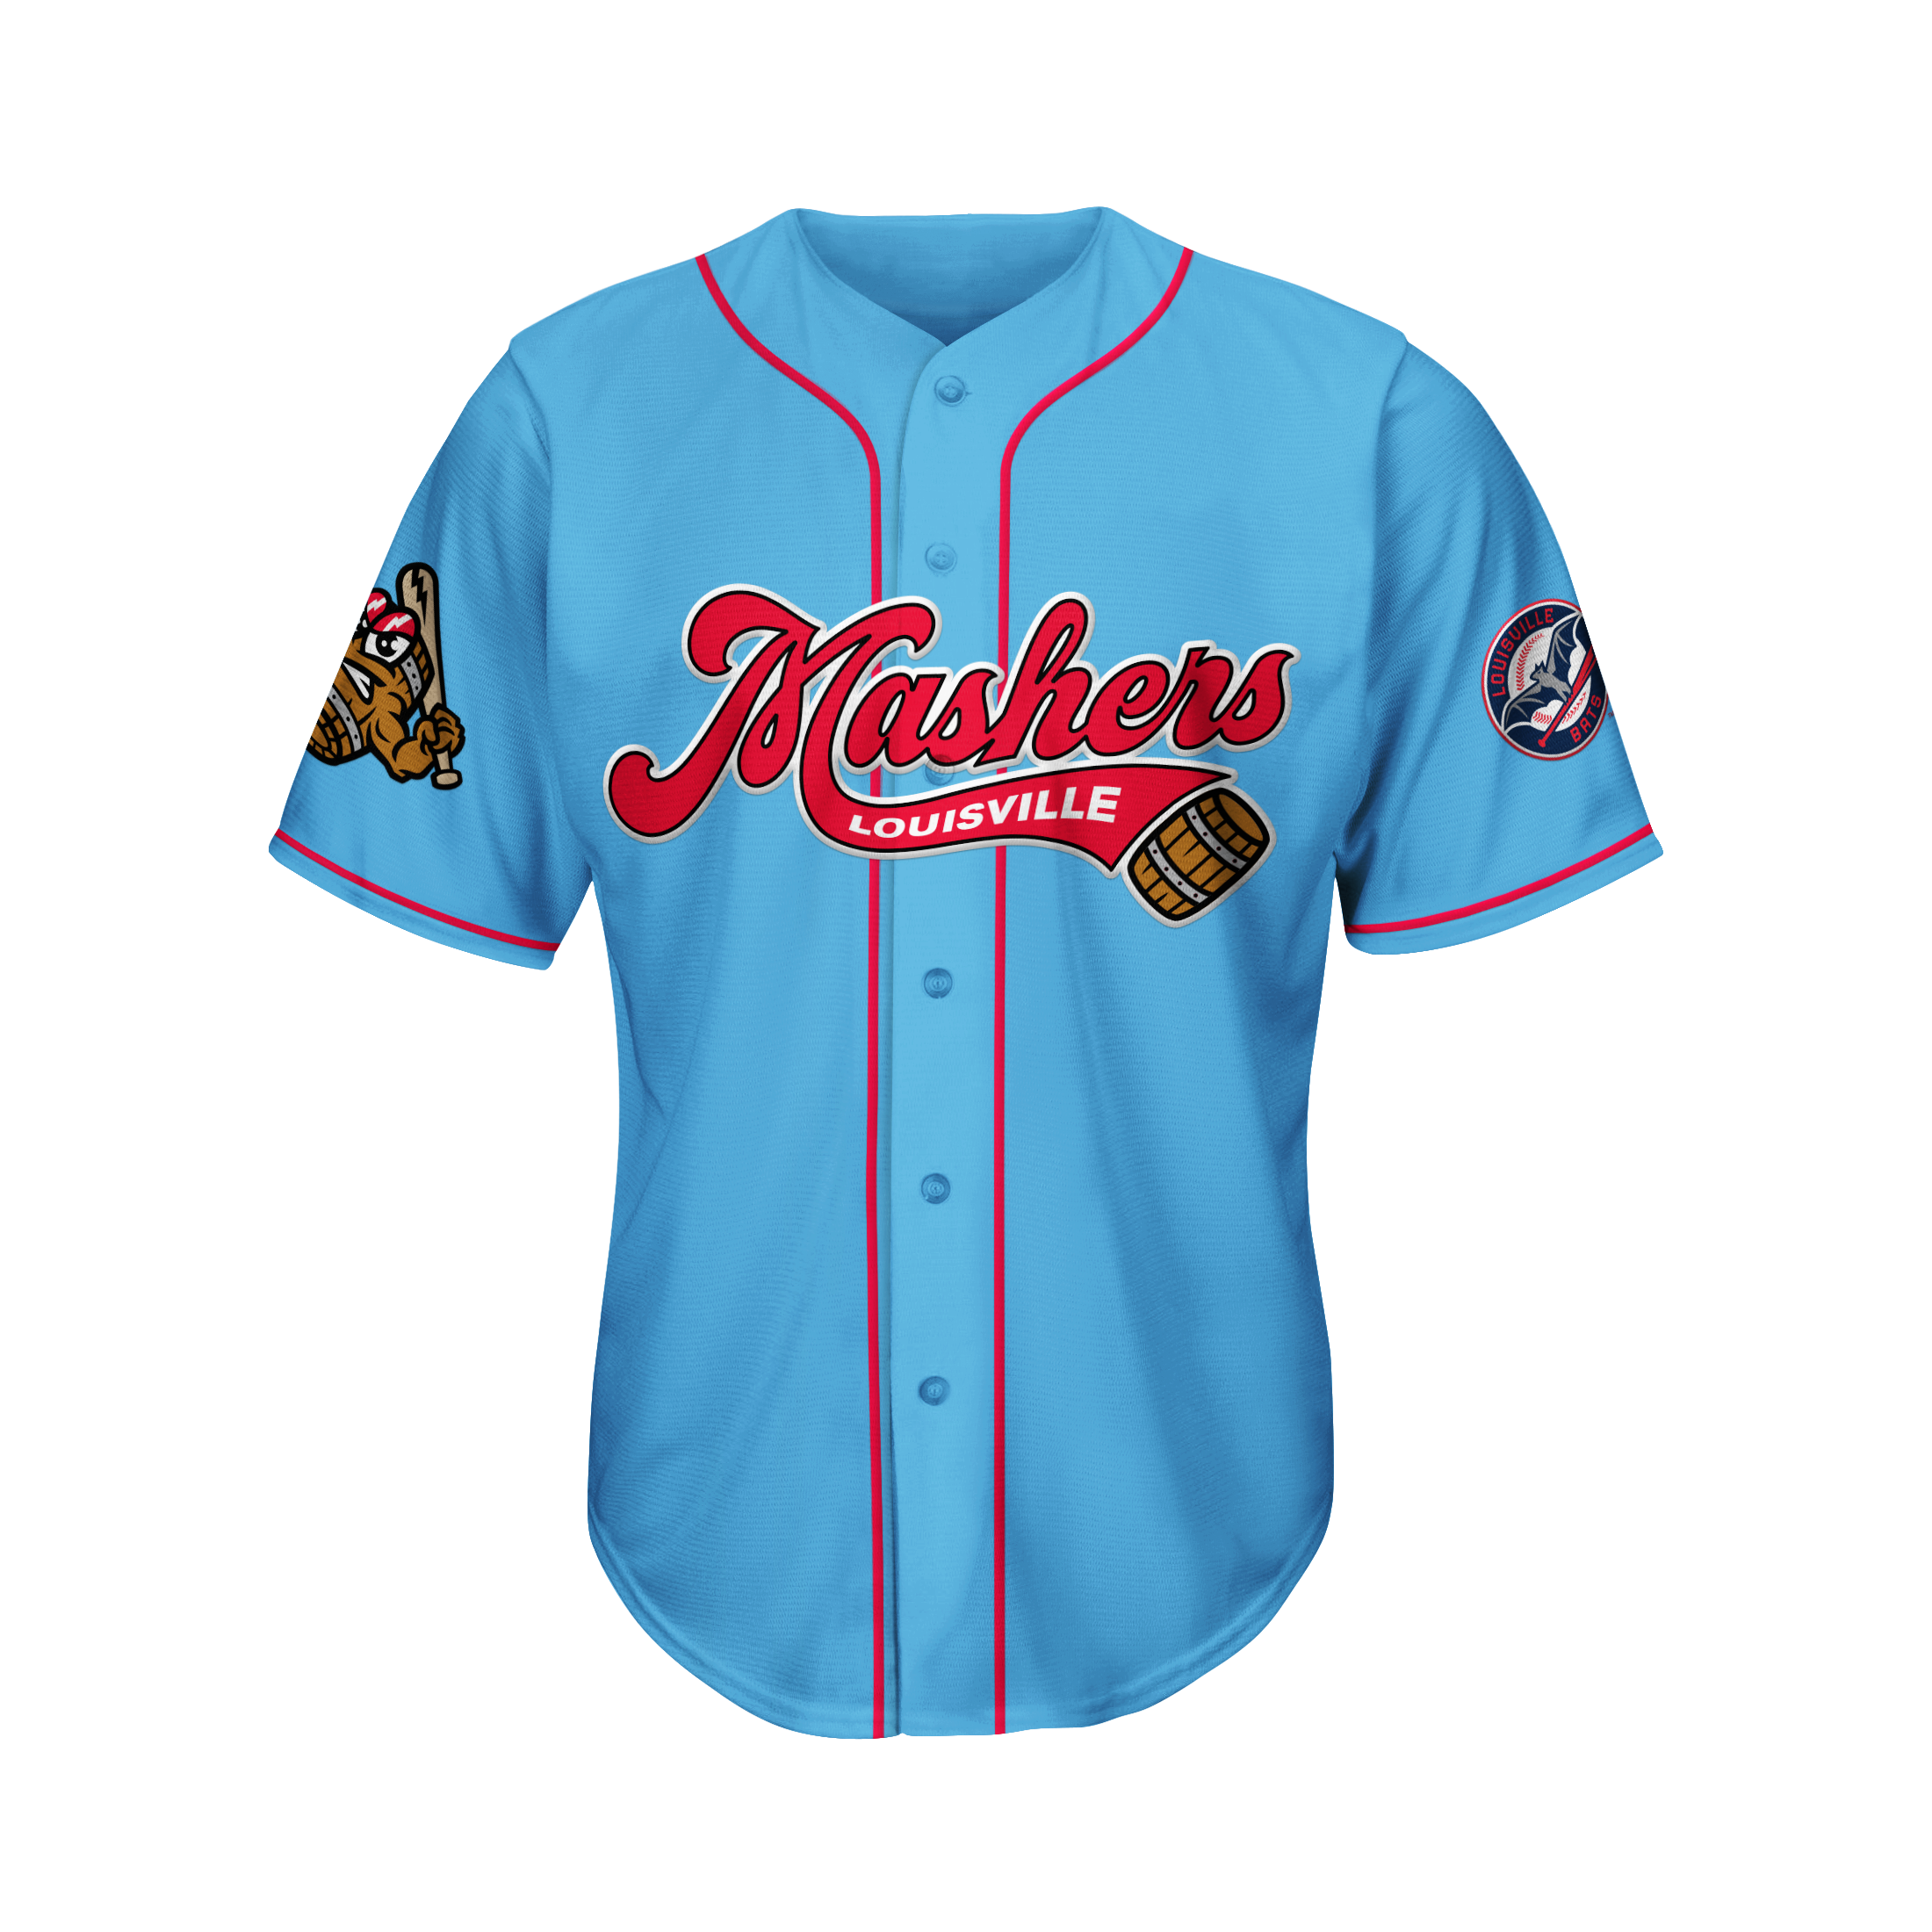 Louisville Bats to pay tribute to bourbon as Mashers – SportsLogos.Net News